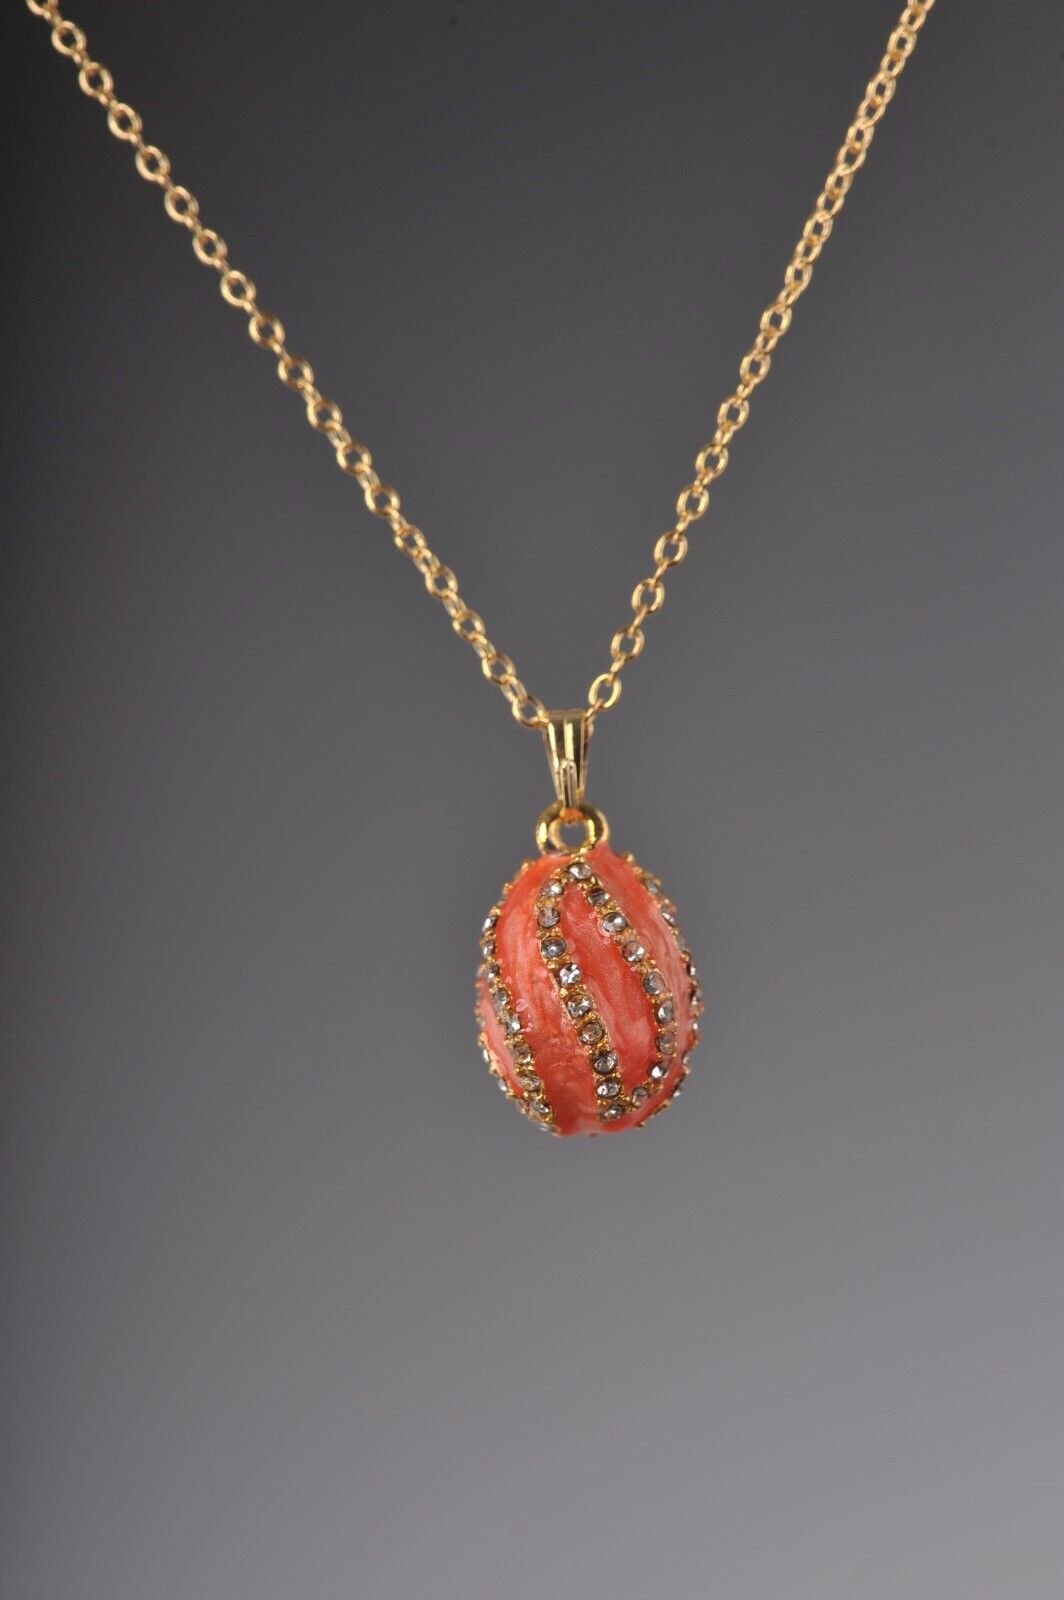 Salmon Spiral Egg Pendant Necklace with crystals by Keren Kopal